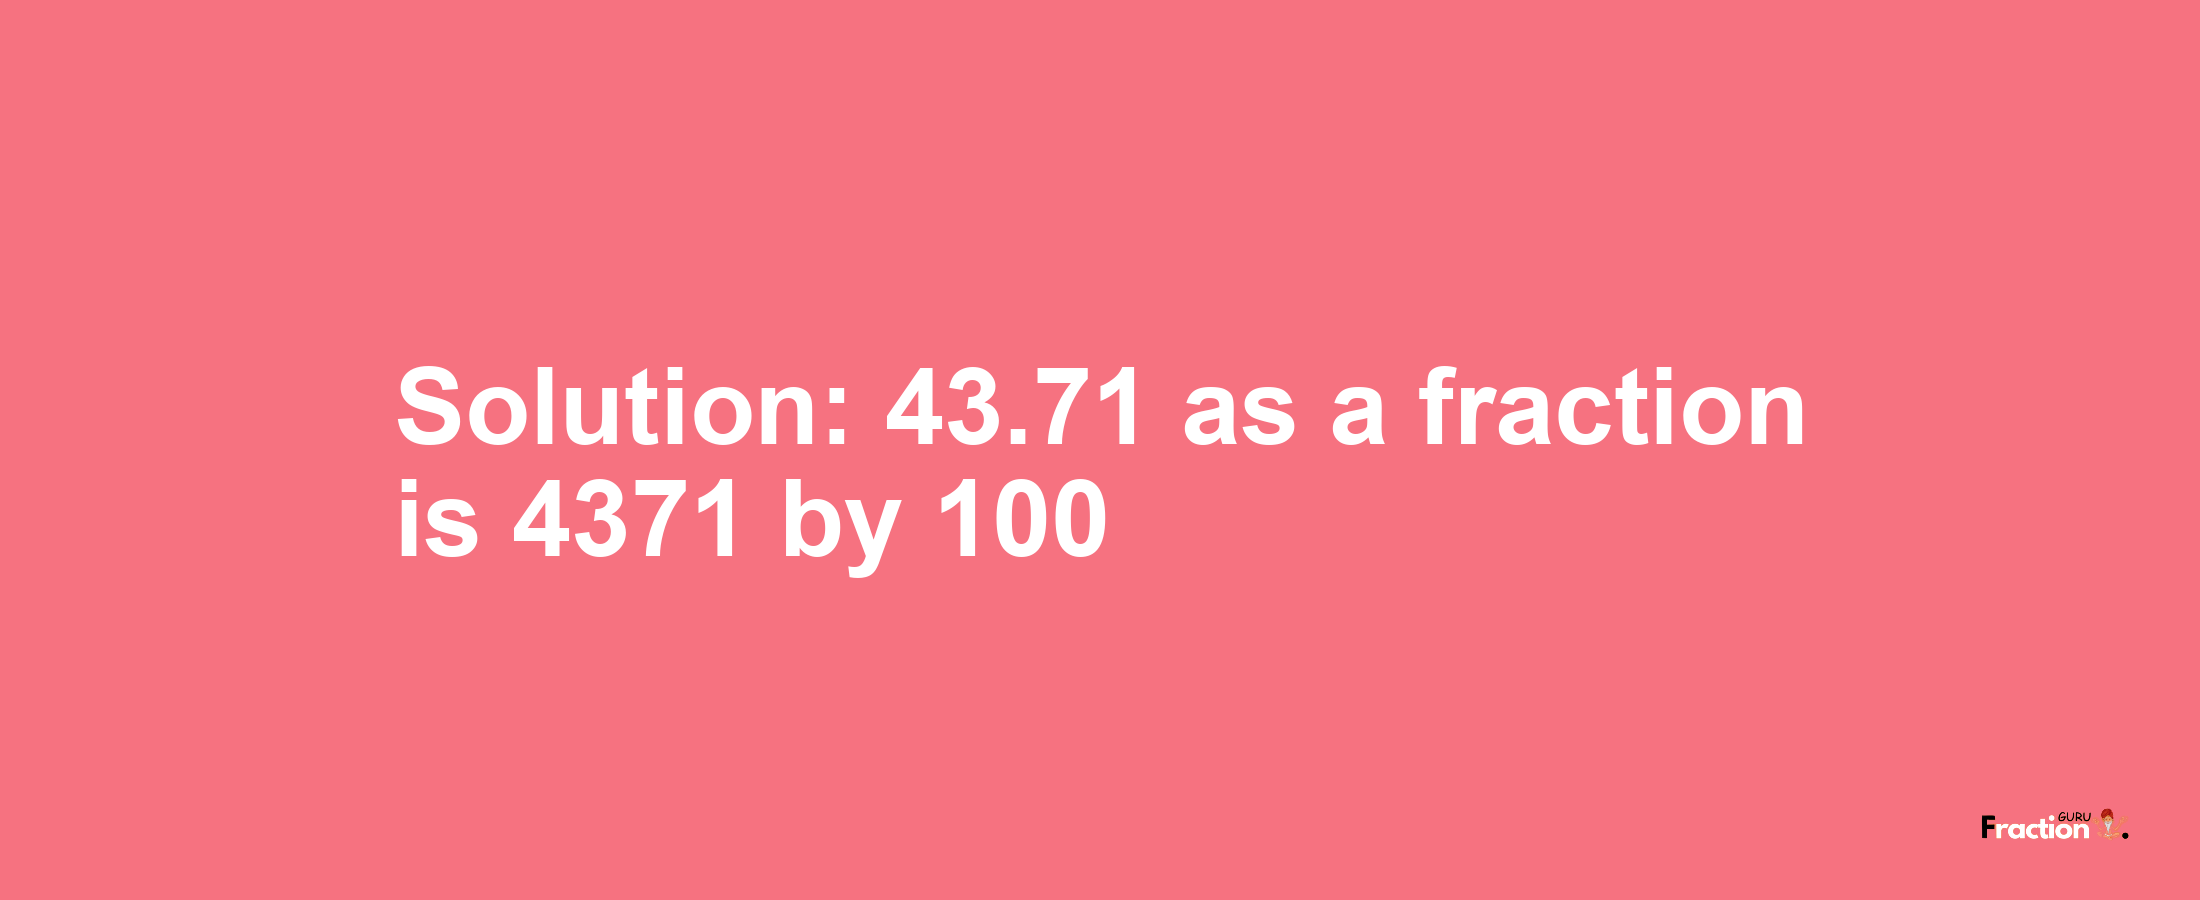 Solution:43.71 as a fraction is 4371/100